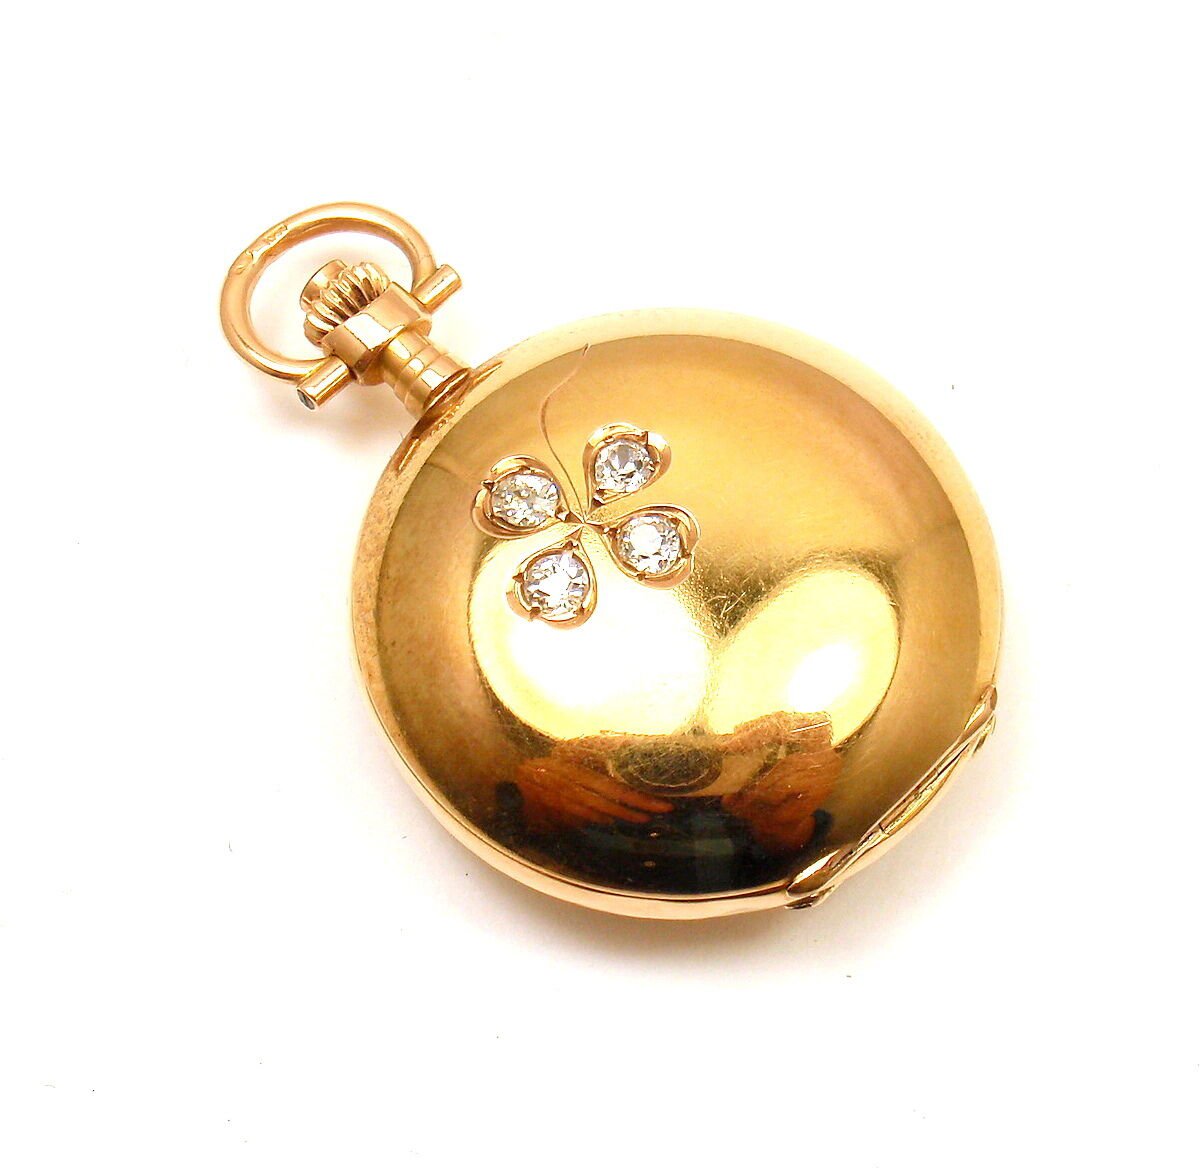 Estate Jewelry & Watches:Watches, Parts & Accessories:Watches:Pocket Watches Vintage! Swiss Yellow Gold Diamond Ladies Pocket Watch High Grade Movement